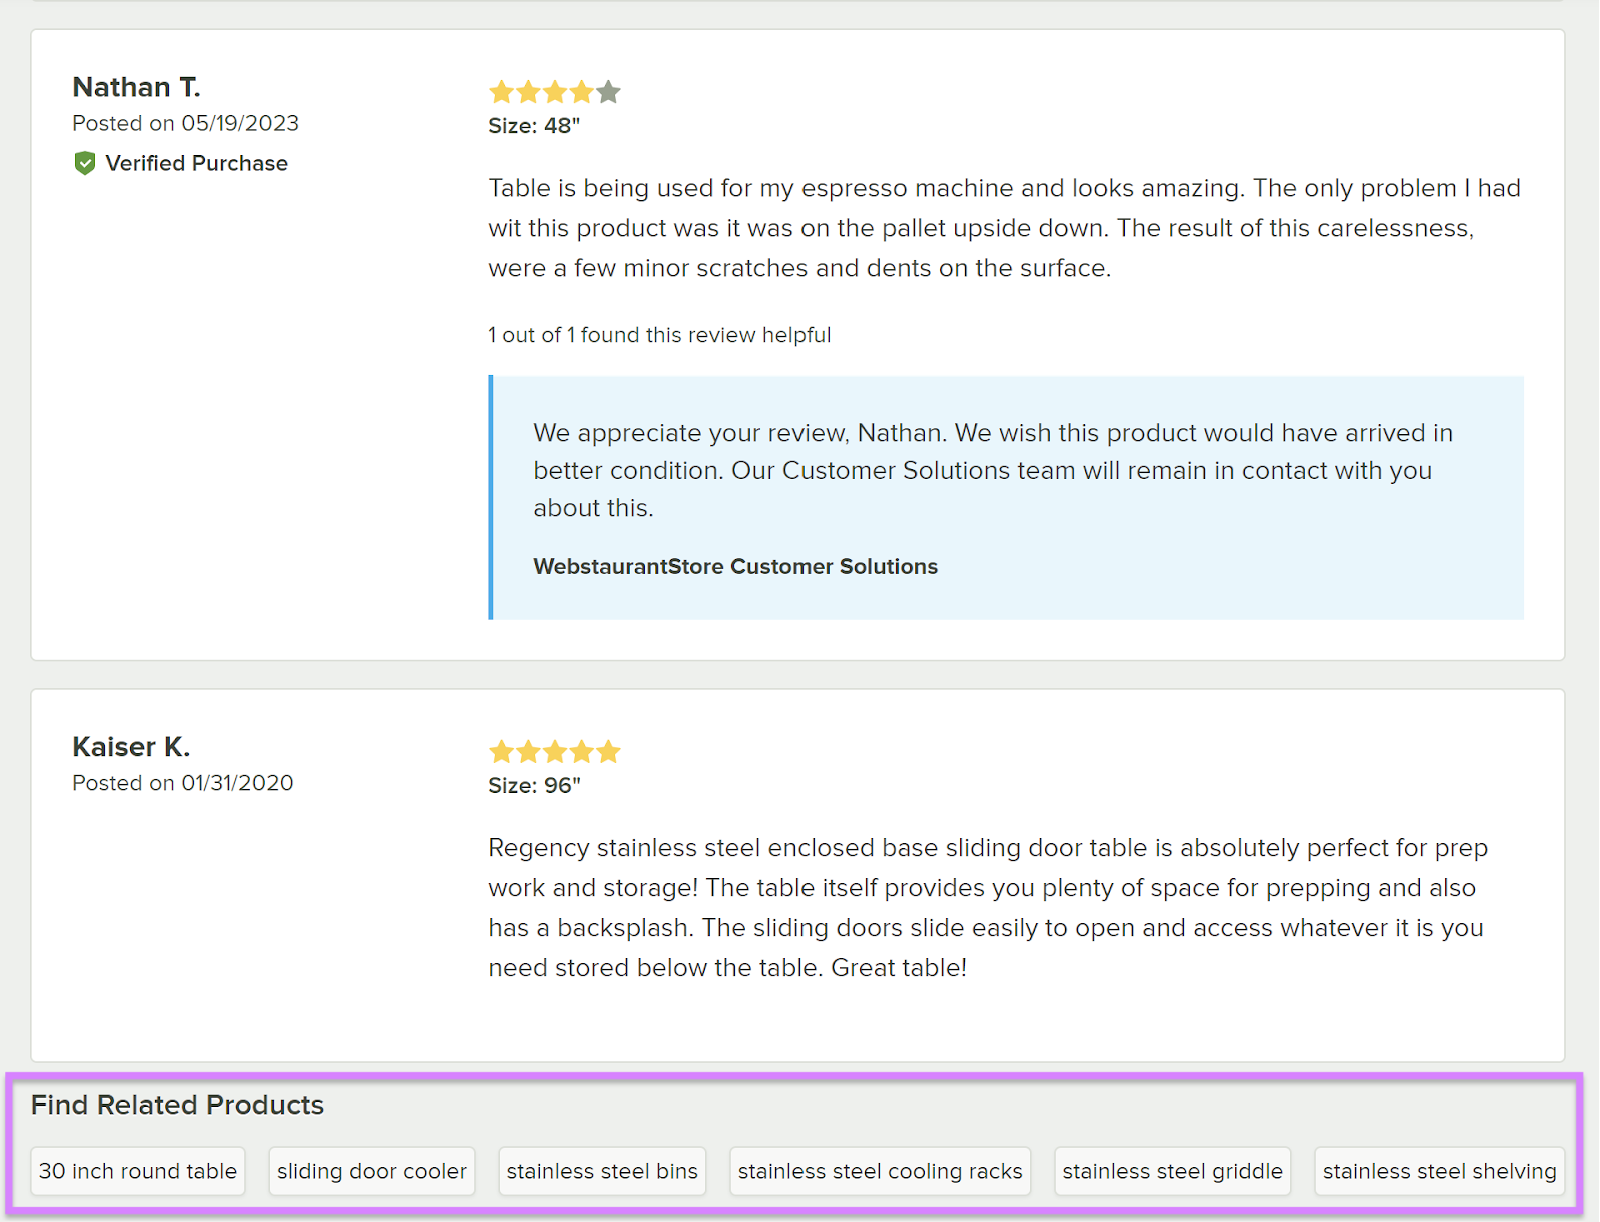 Customer reviews and recommendations for related products featured on WebstaurantStore's site